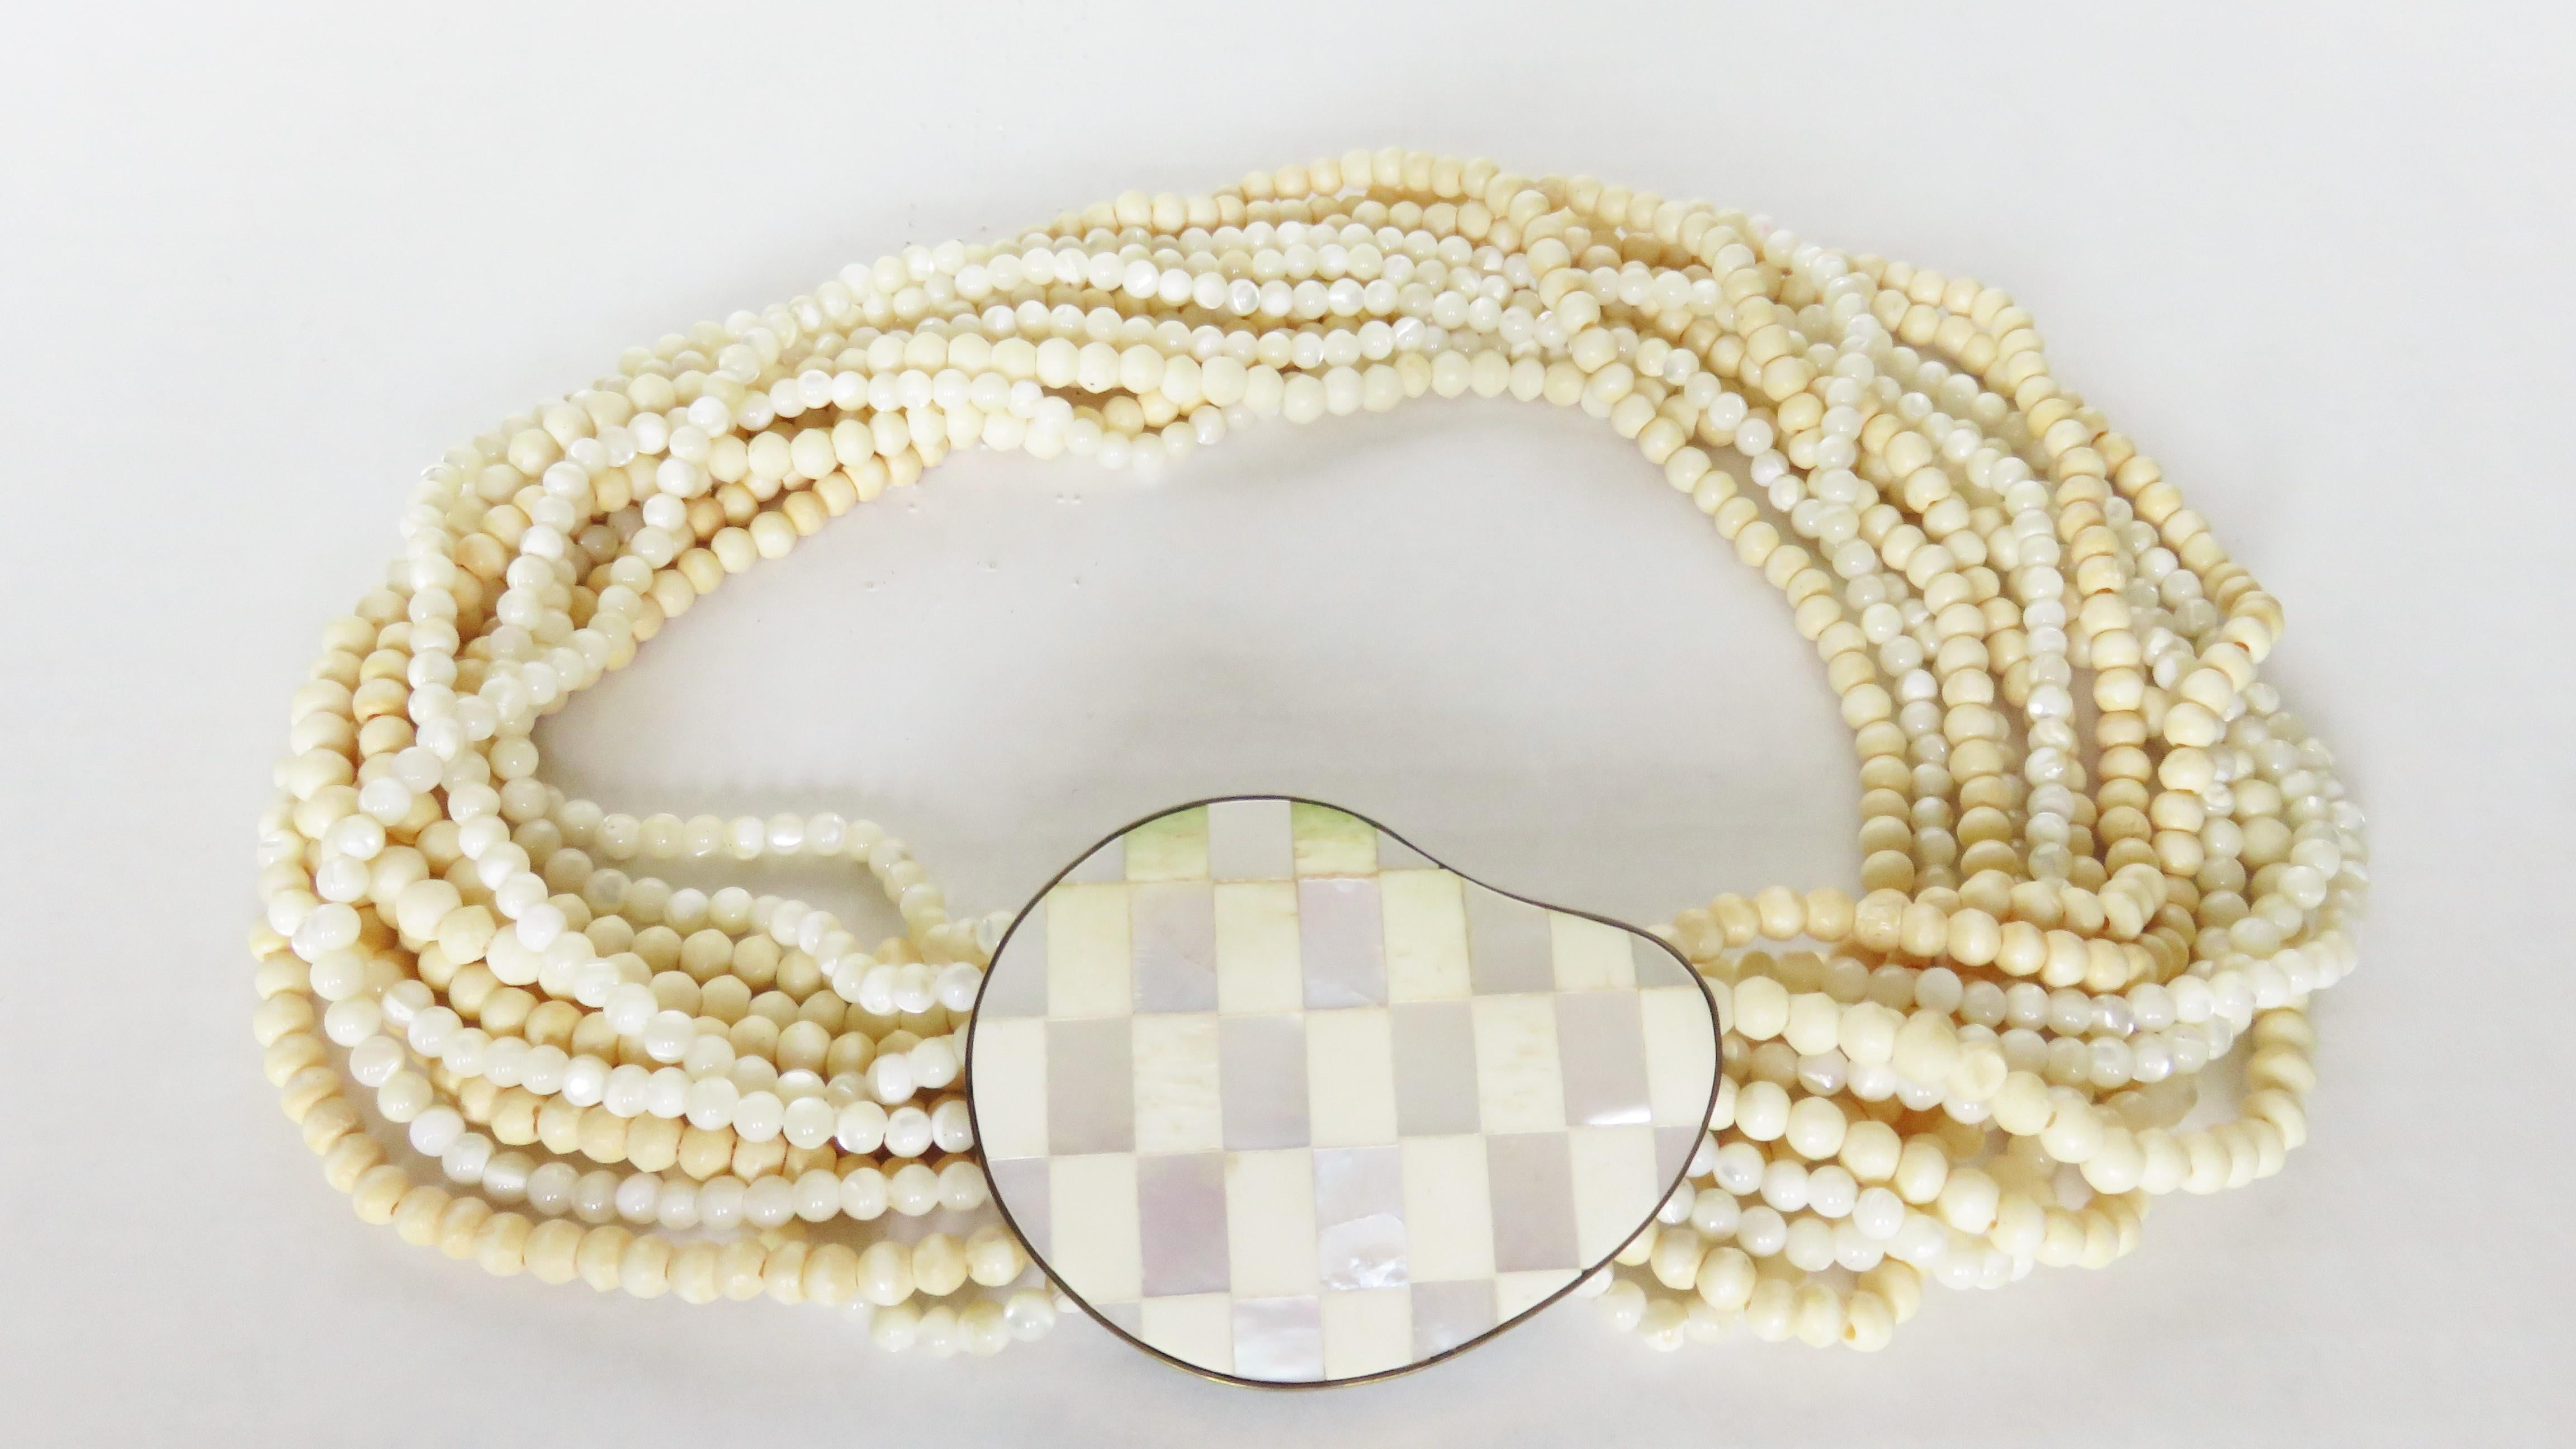 A beautiful torsade choker necklace by artist Celia Sebiri consisting of 12 mother-of-pearl and bone beaded strands joined with a large 2.25 X 1.34